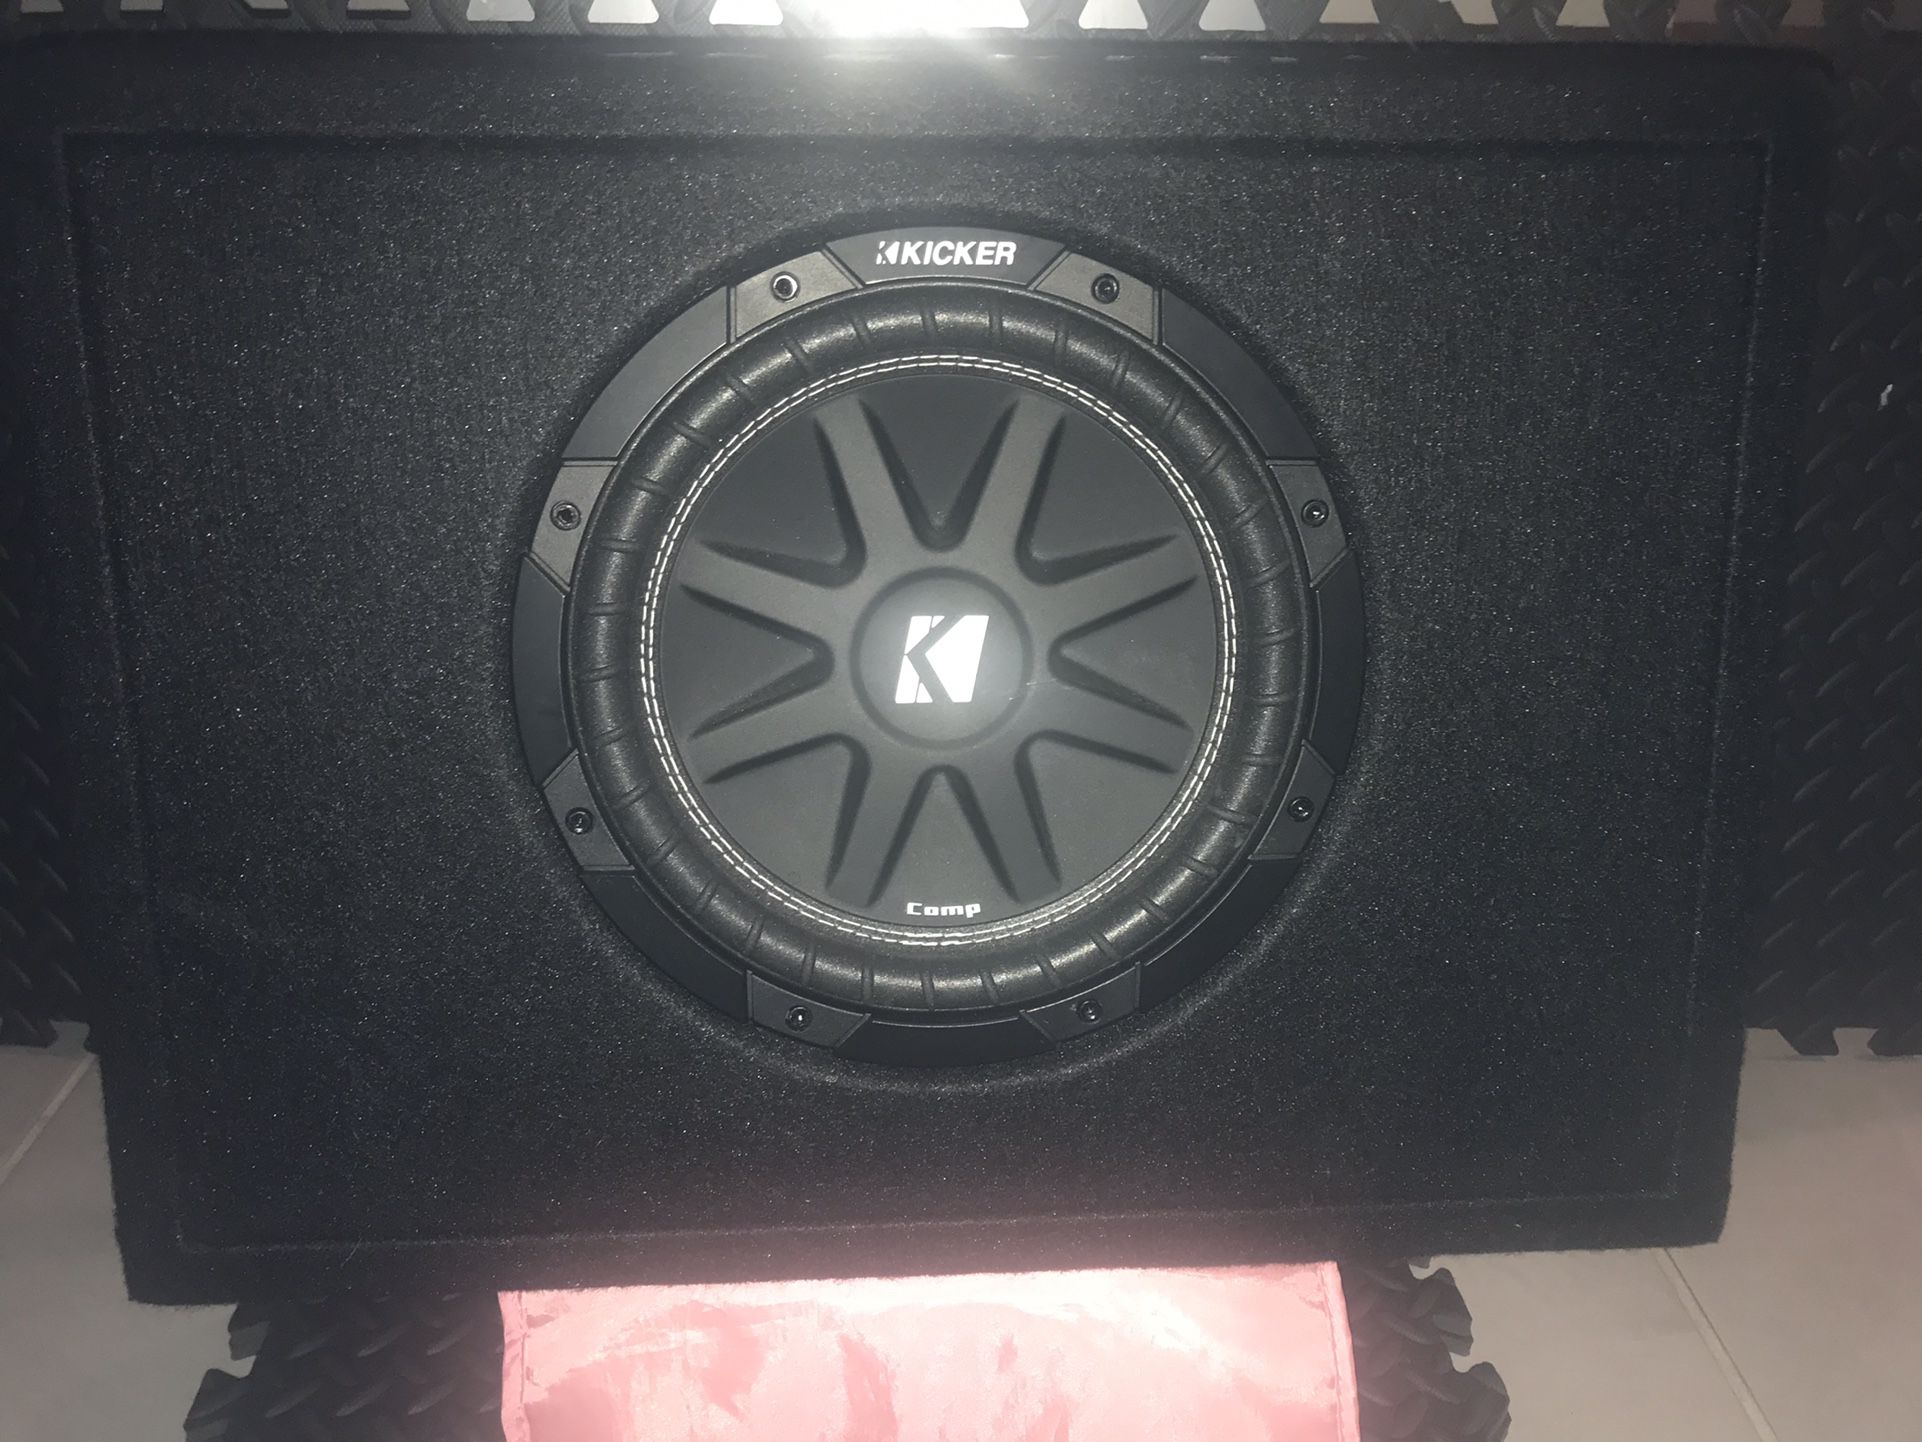 Kicker Comp Subwoofer and Truck Radio